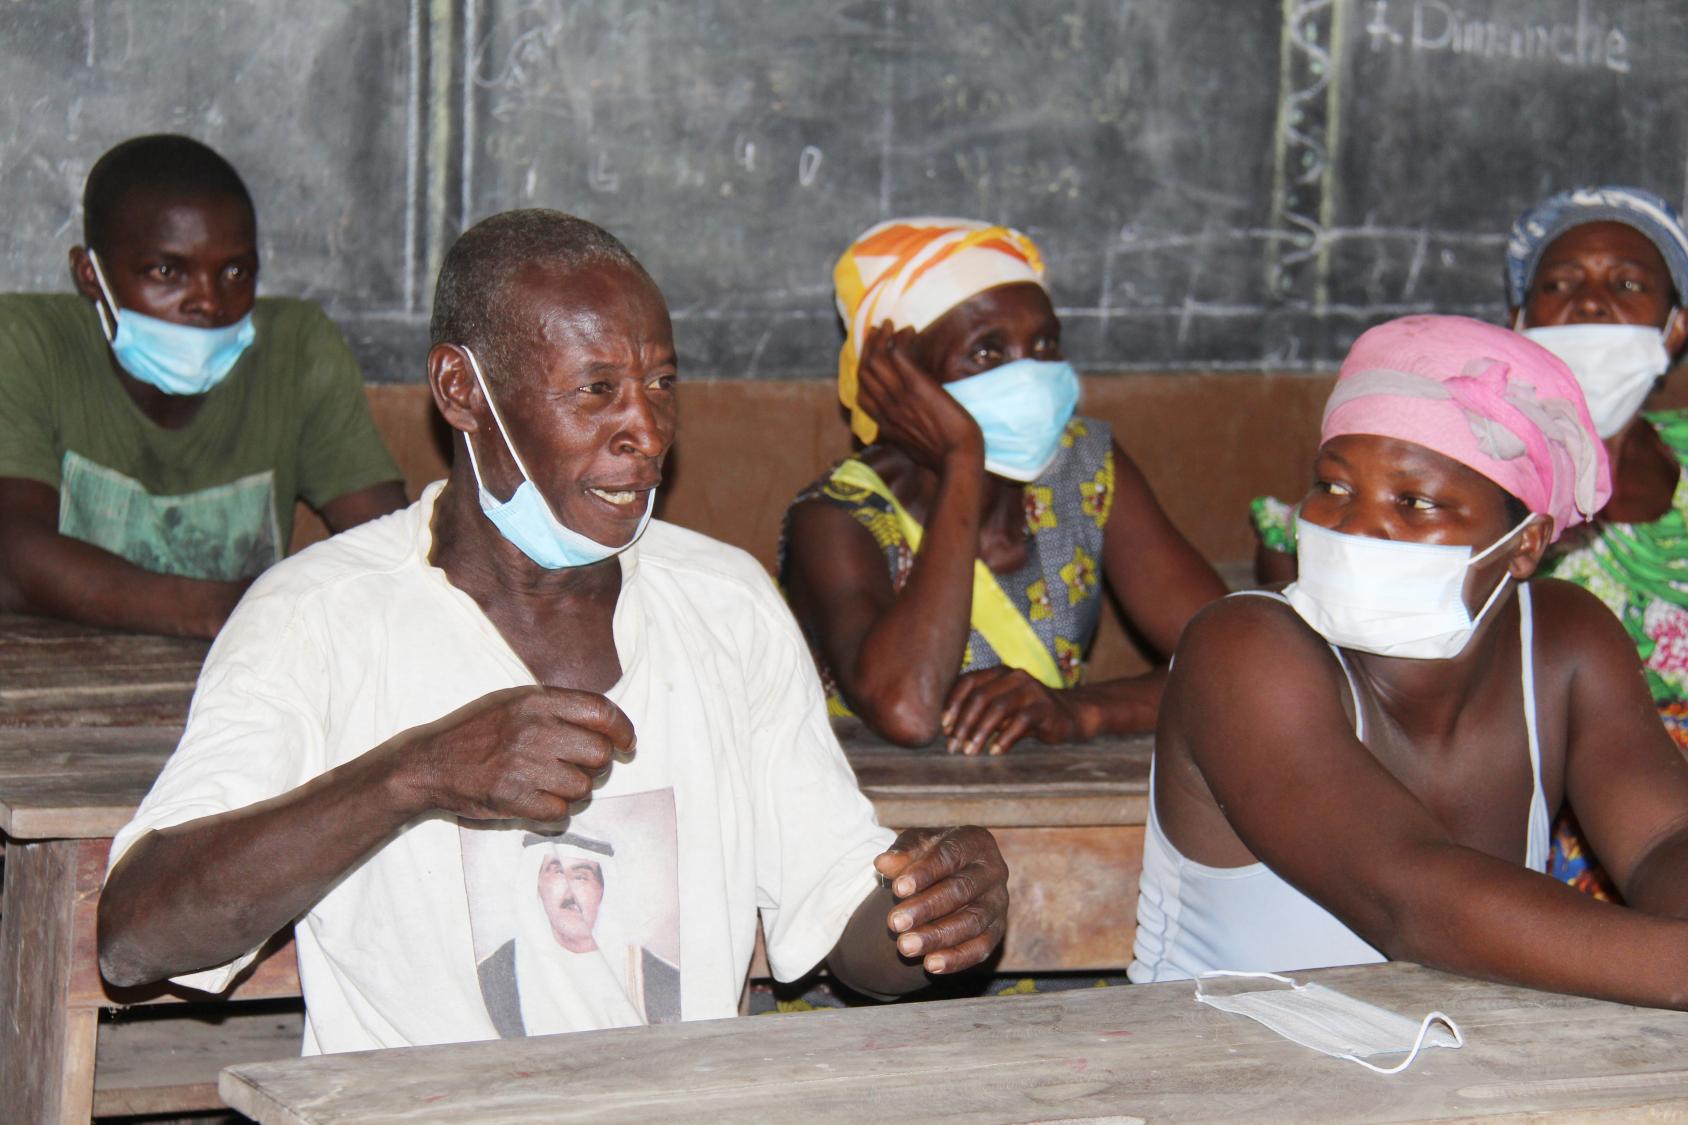 An older man is sitting at a wooden table in a classroom and speaking with a face mask pulled down under his chin. Several people, all wearing face masks, are sitting next to him and behind him.